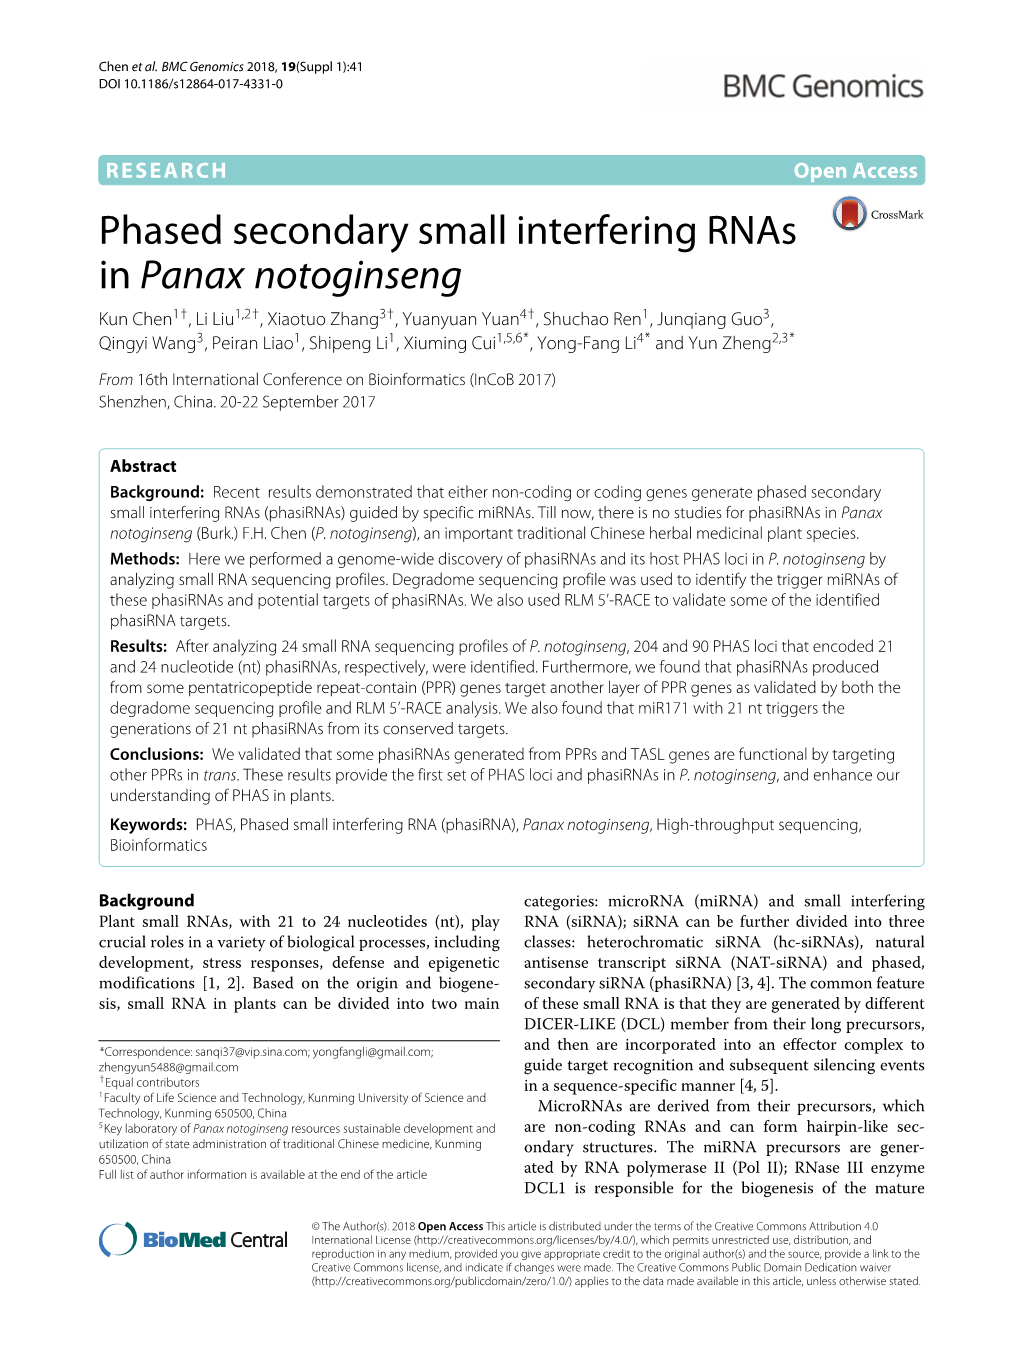 Phased Secondary Small Interfering Rnas in Panax Notoginseng